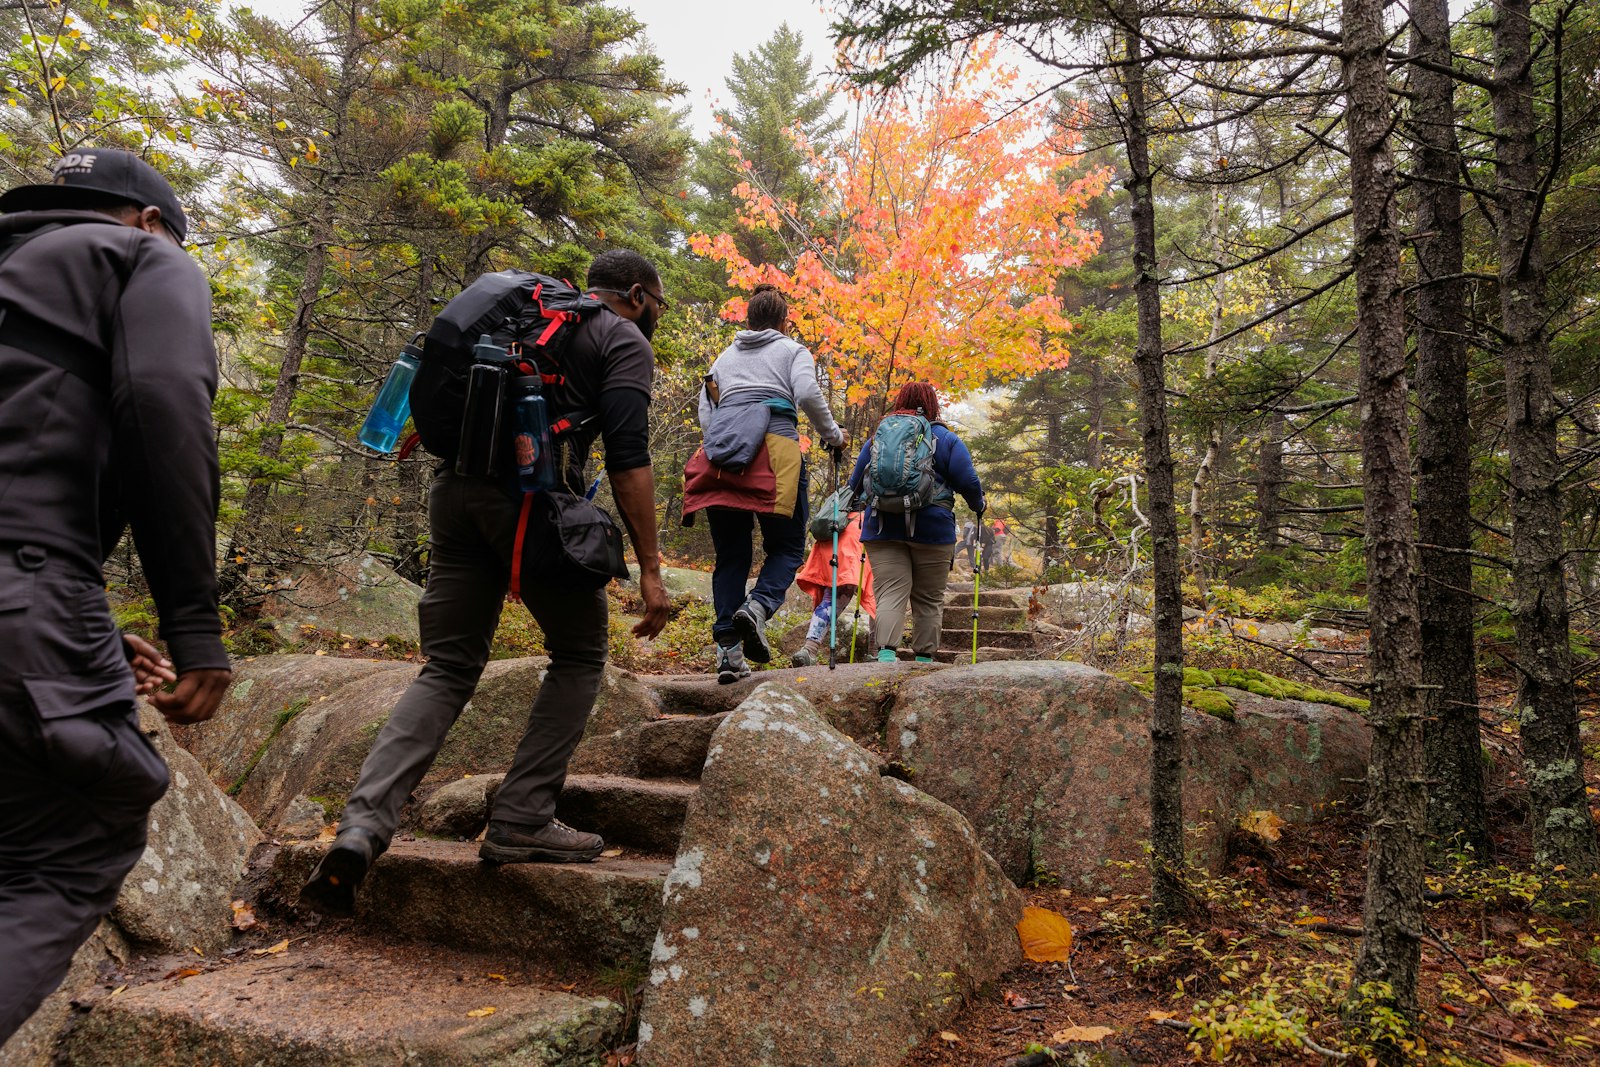 A group of people hike up a trail, using stone steps to walk in a line through fall foliage